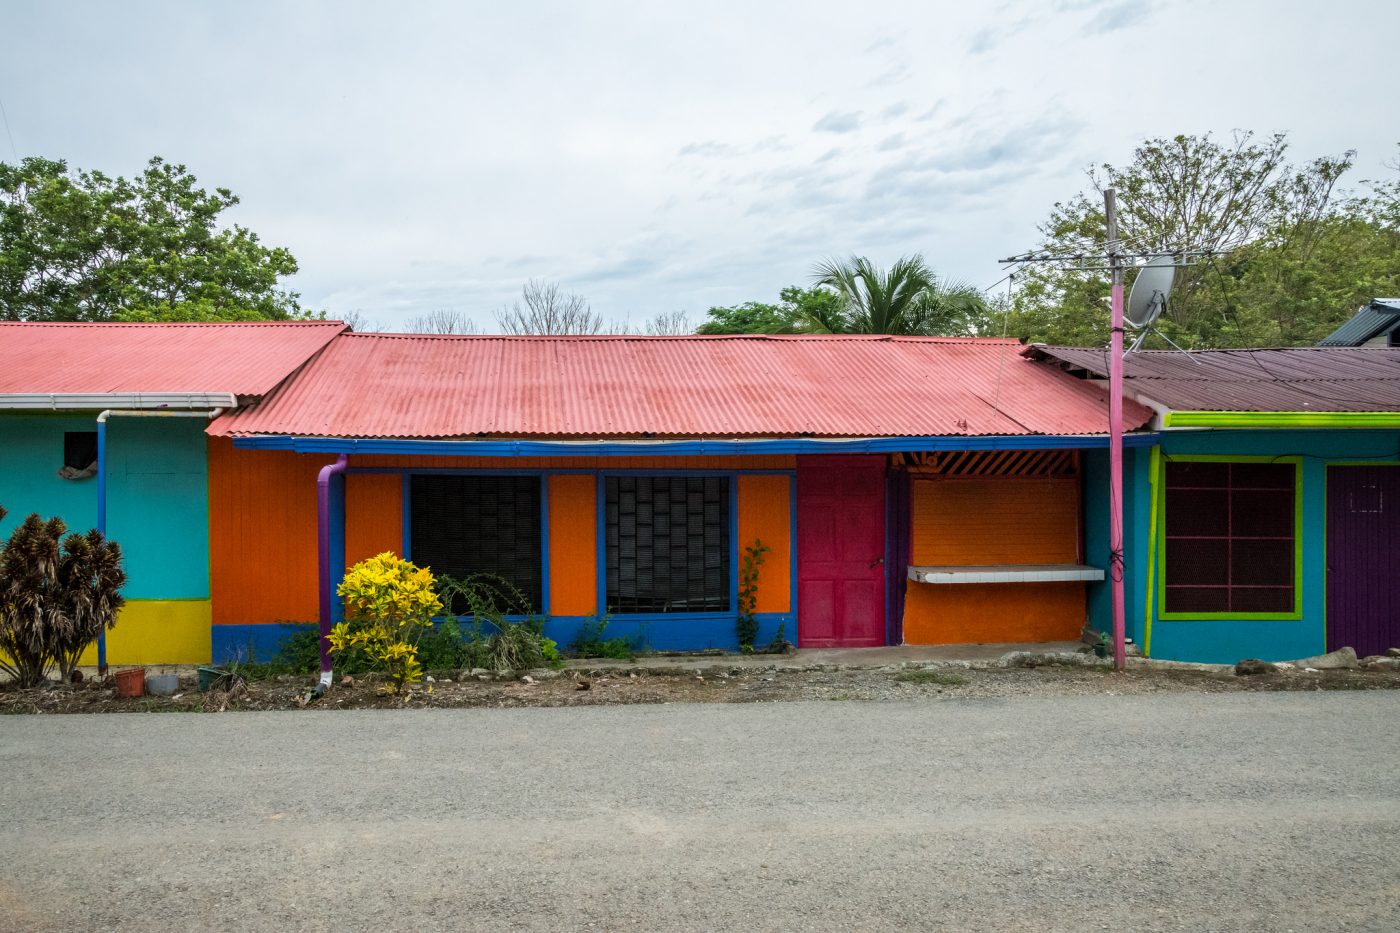 Colourful homes in Uvita. Photo by dconvertini via Flickr CC